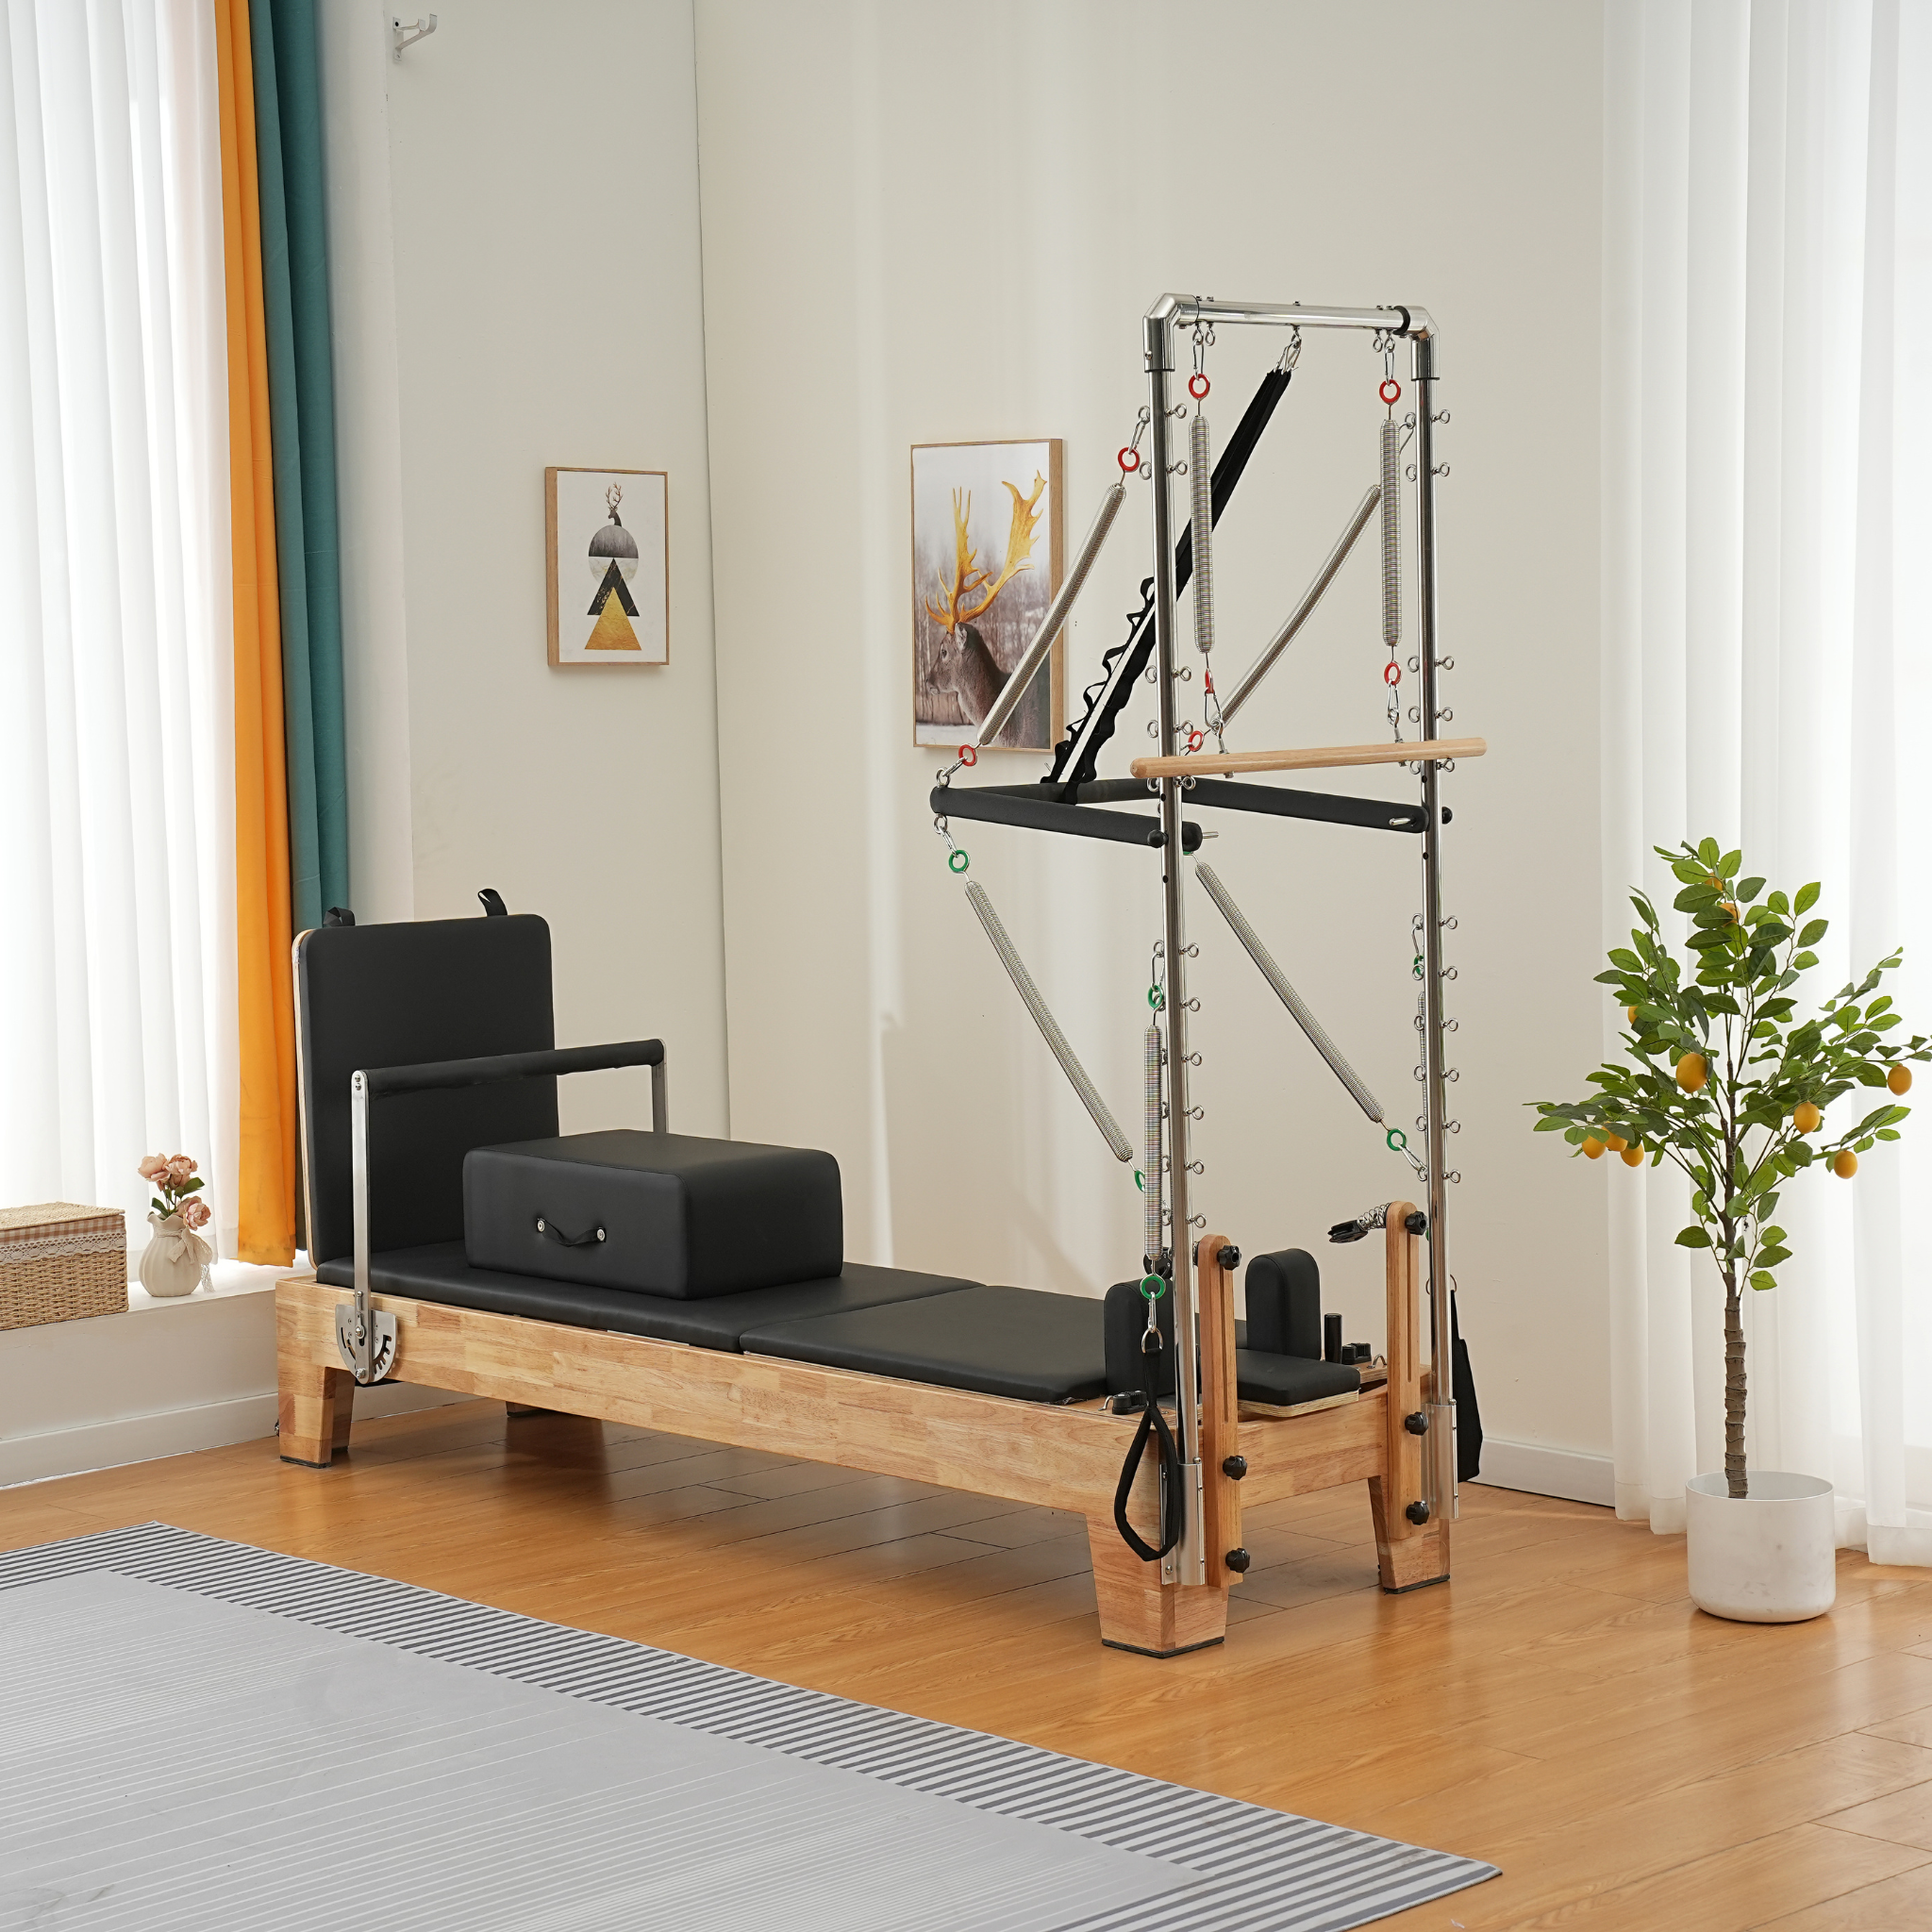 Pilates Reformer With Tower Vintage-Pilates Reformer Machine For Home